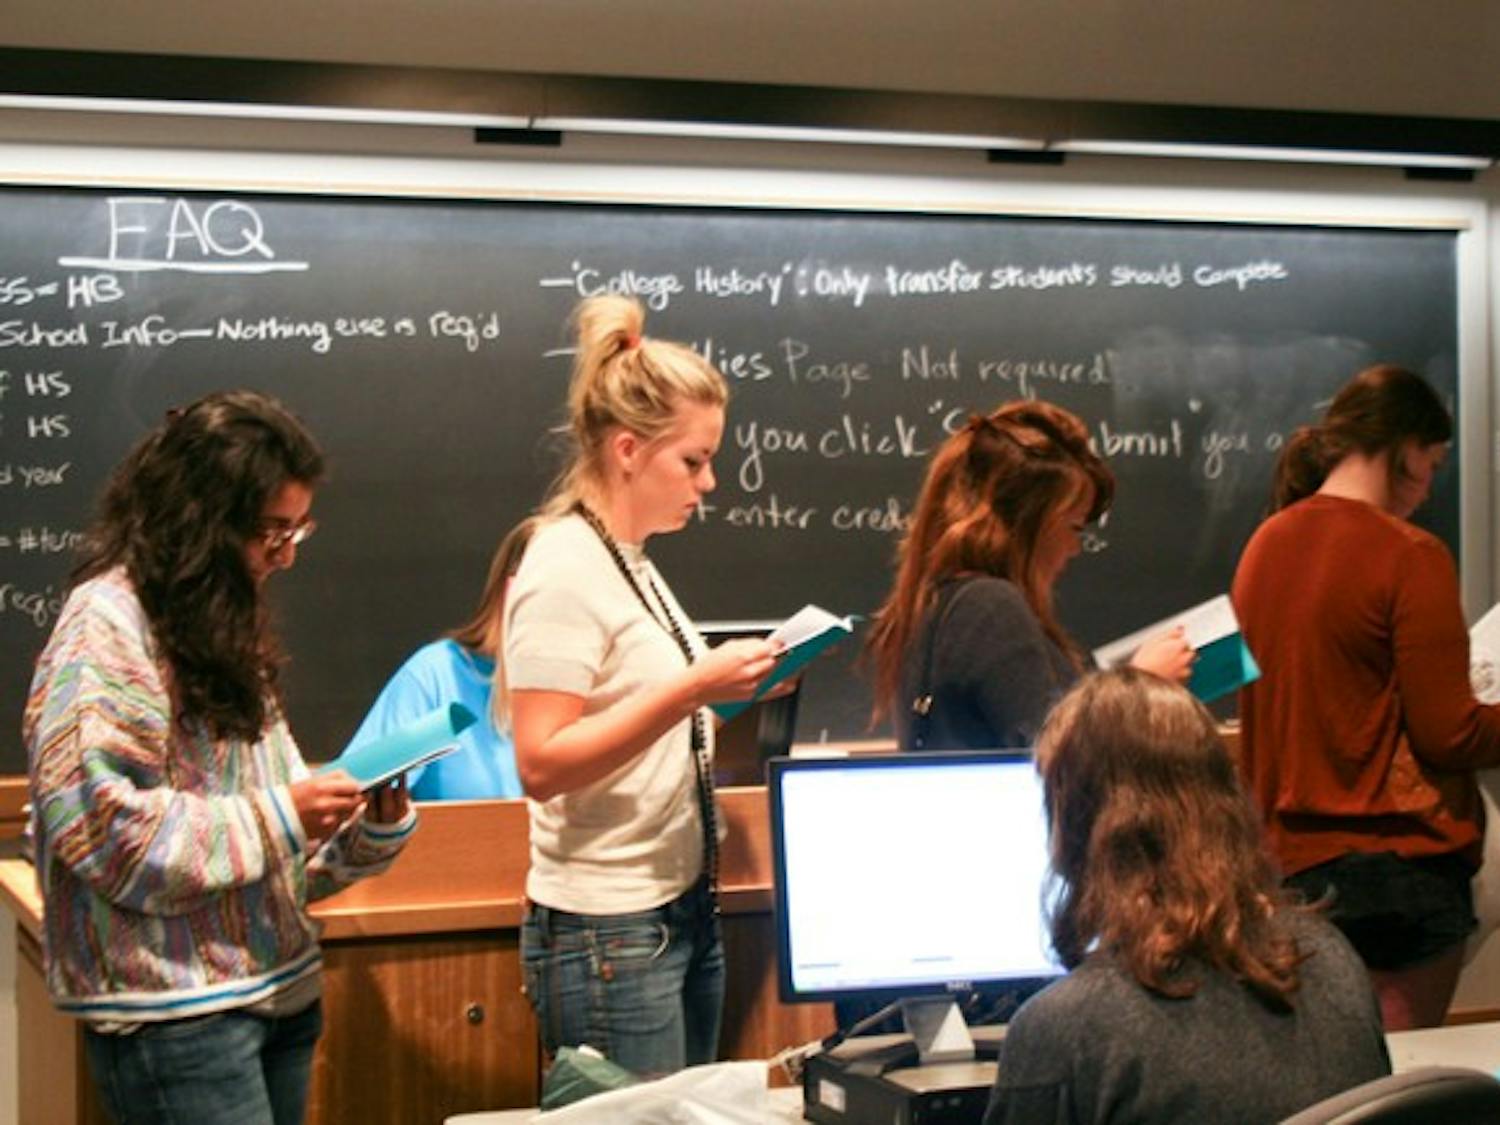 Women register to participate in fall sorority rush, which will be conducted with the use of a new computer system, Select and Rank. The system is aimed at better matching women and sororities.